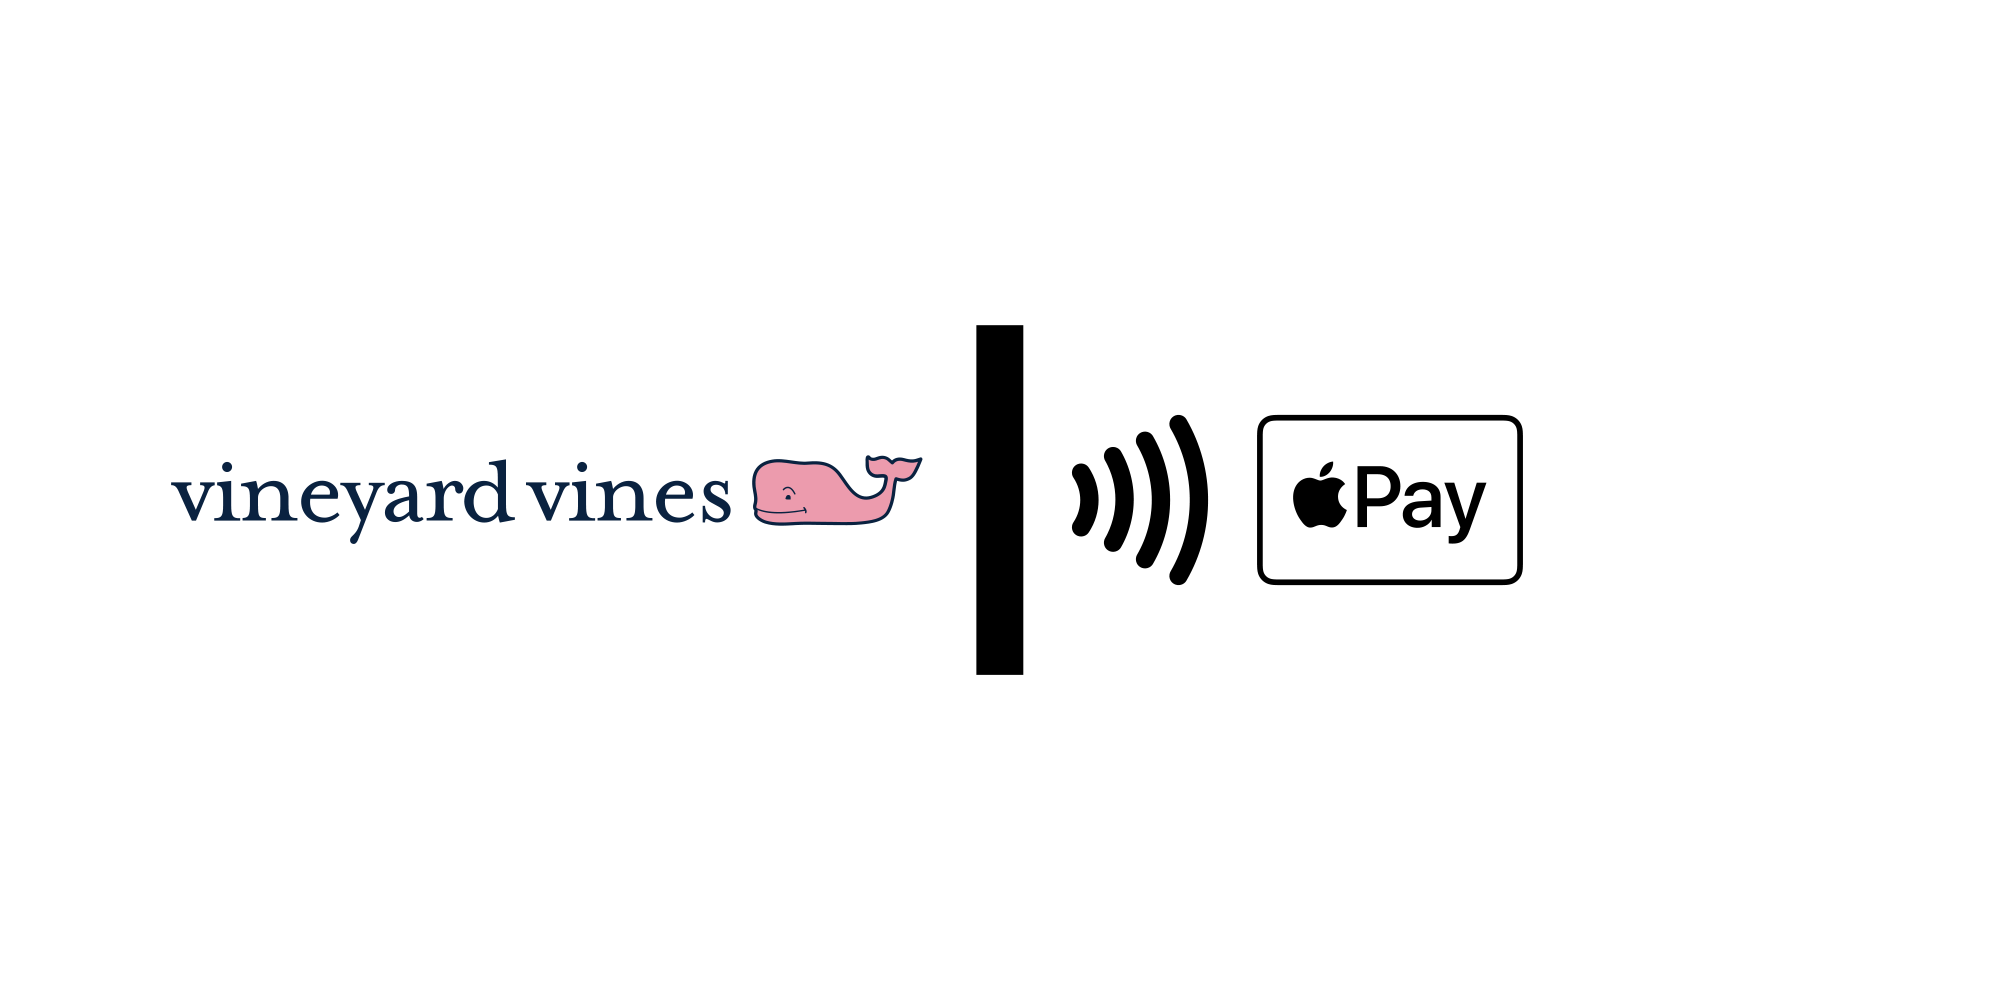 Vineyard Vines accepts contactless payments, as well as Apple Pay online.